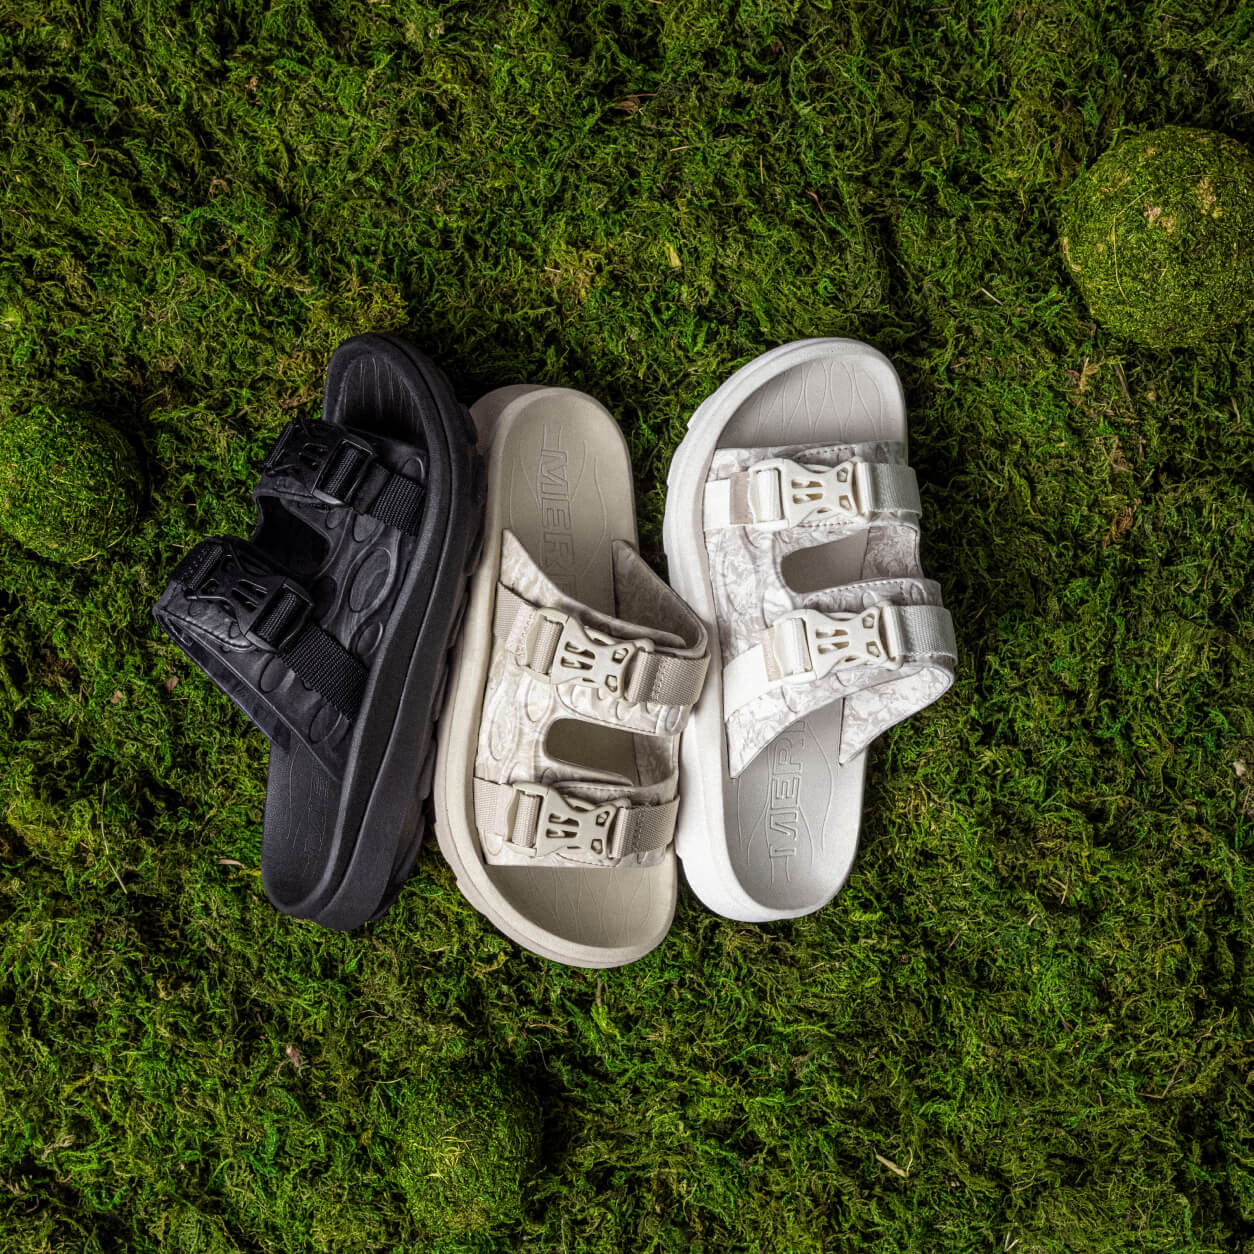 Sandals laying on a soft bed of moss.